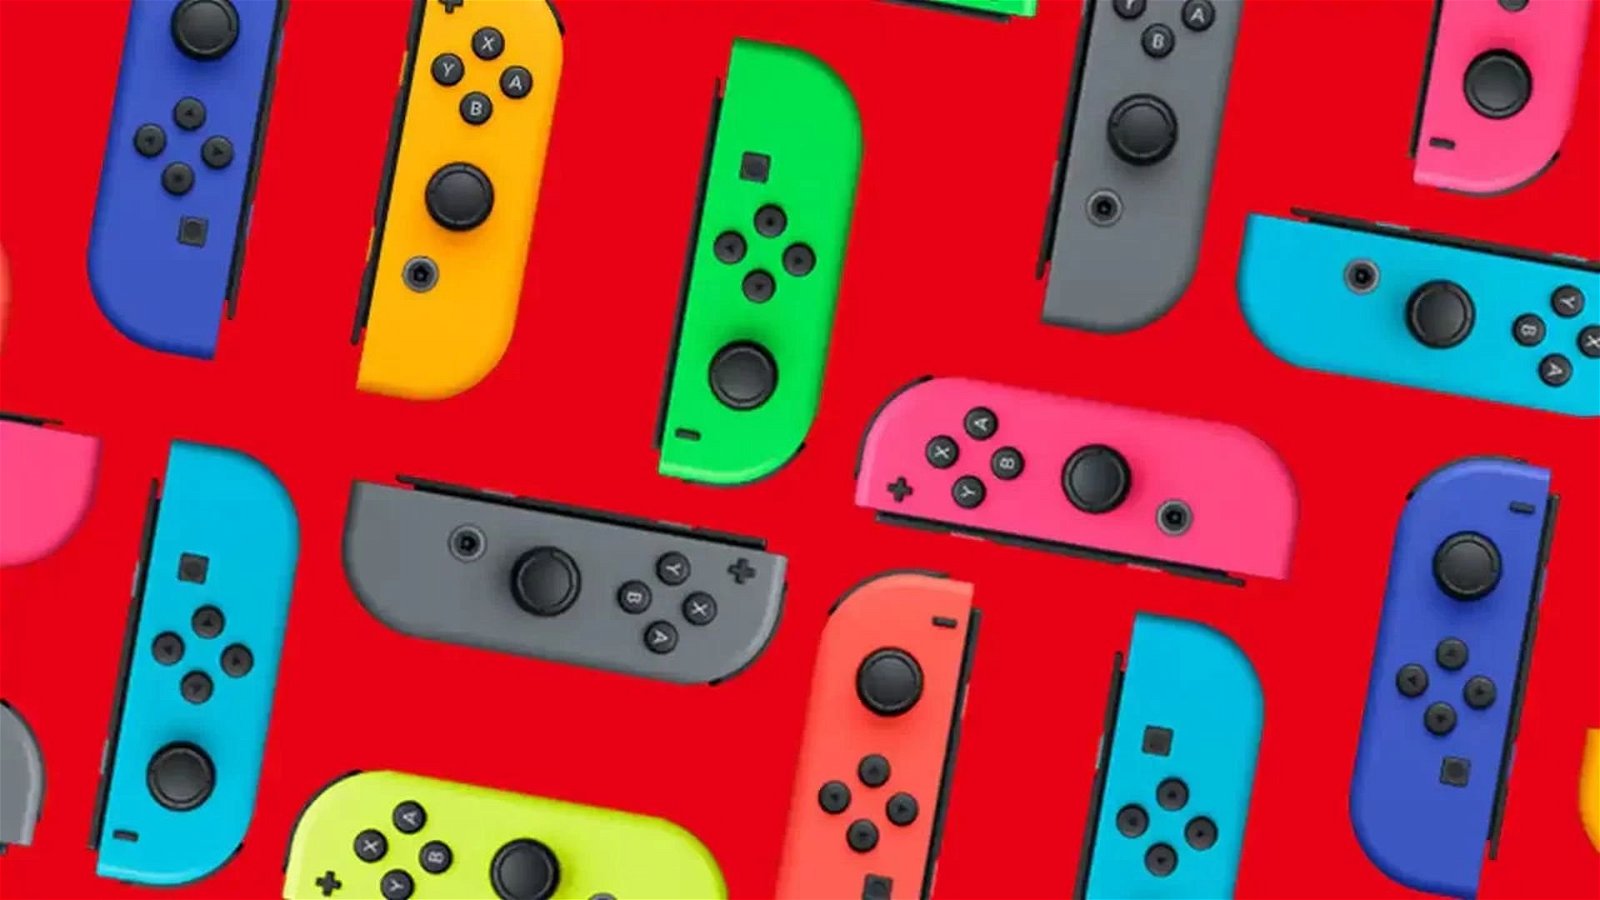 The Joy-Con Drift exists, but no one can prove it in court